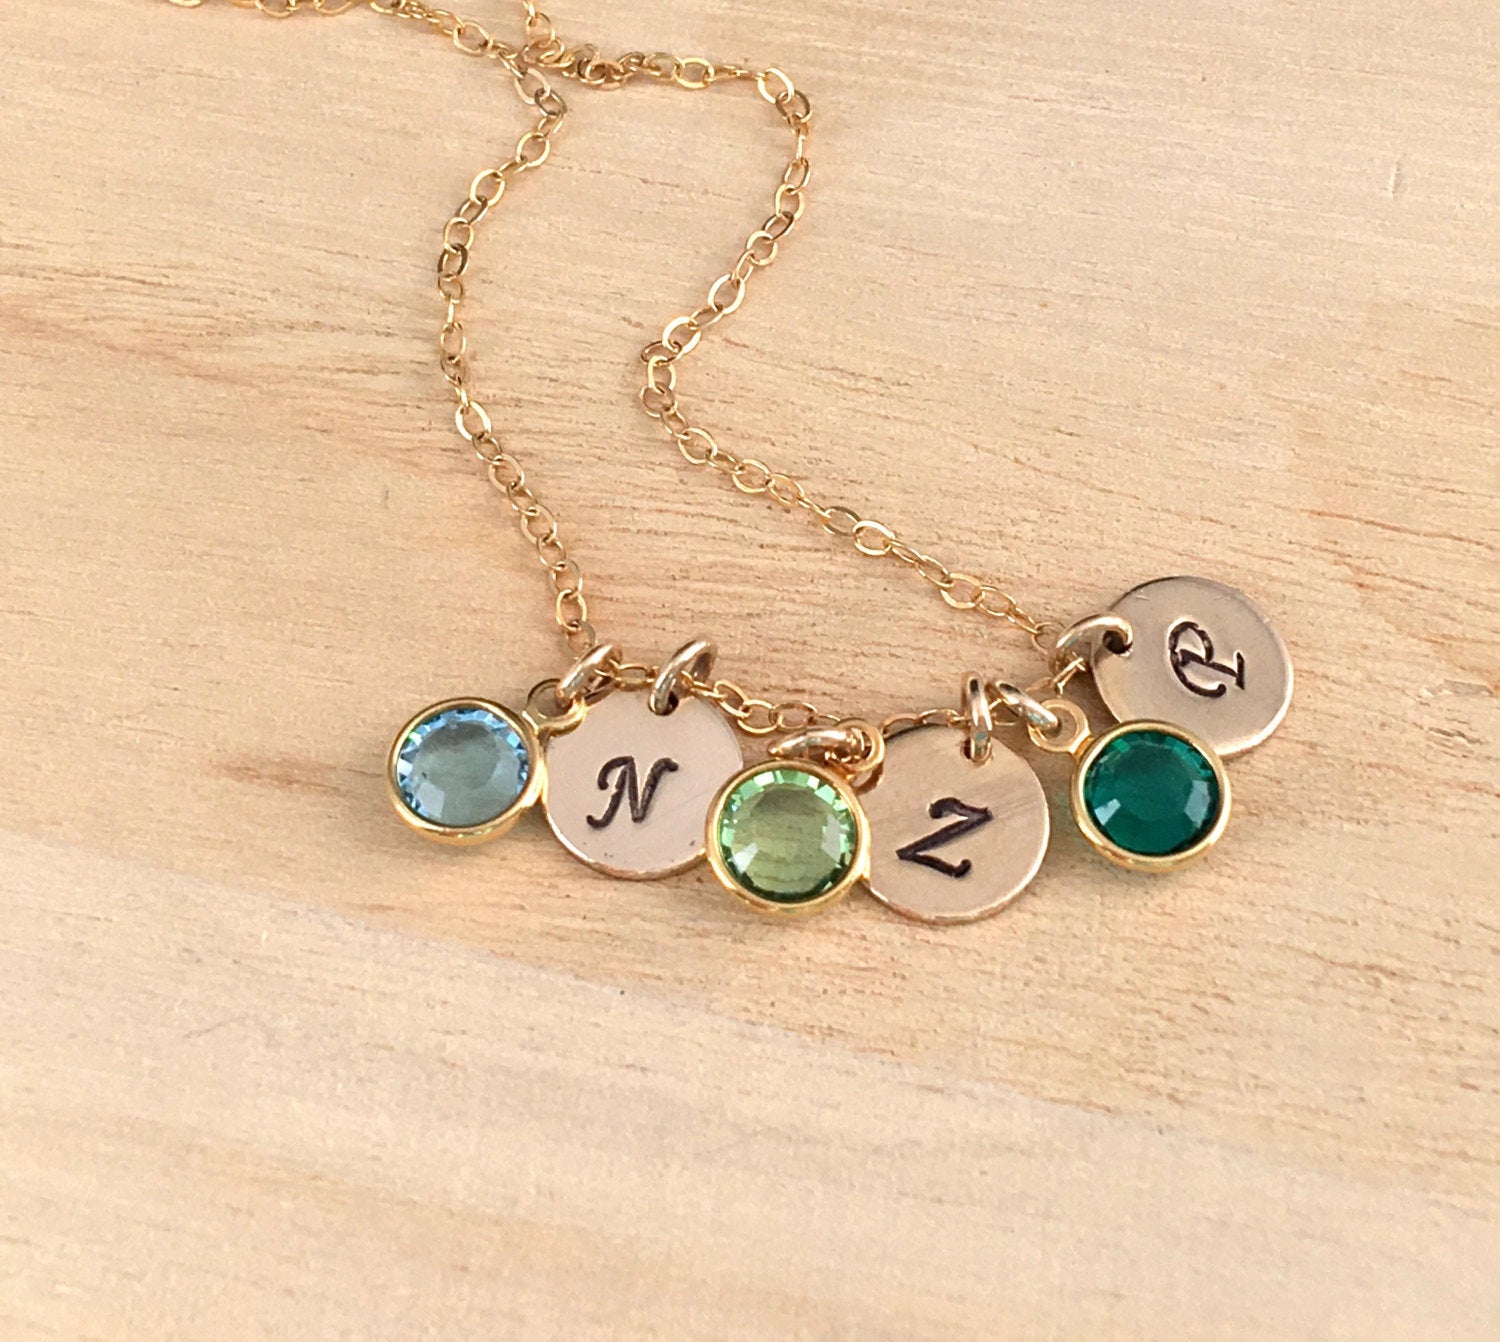 Personalized Birthstone Necklace for Mom | Birthstone Jewelry with Name |  IfShe – ifshe.com